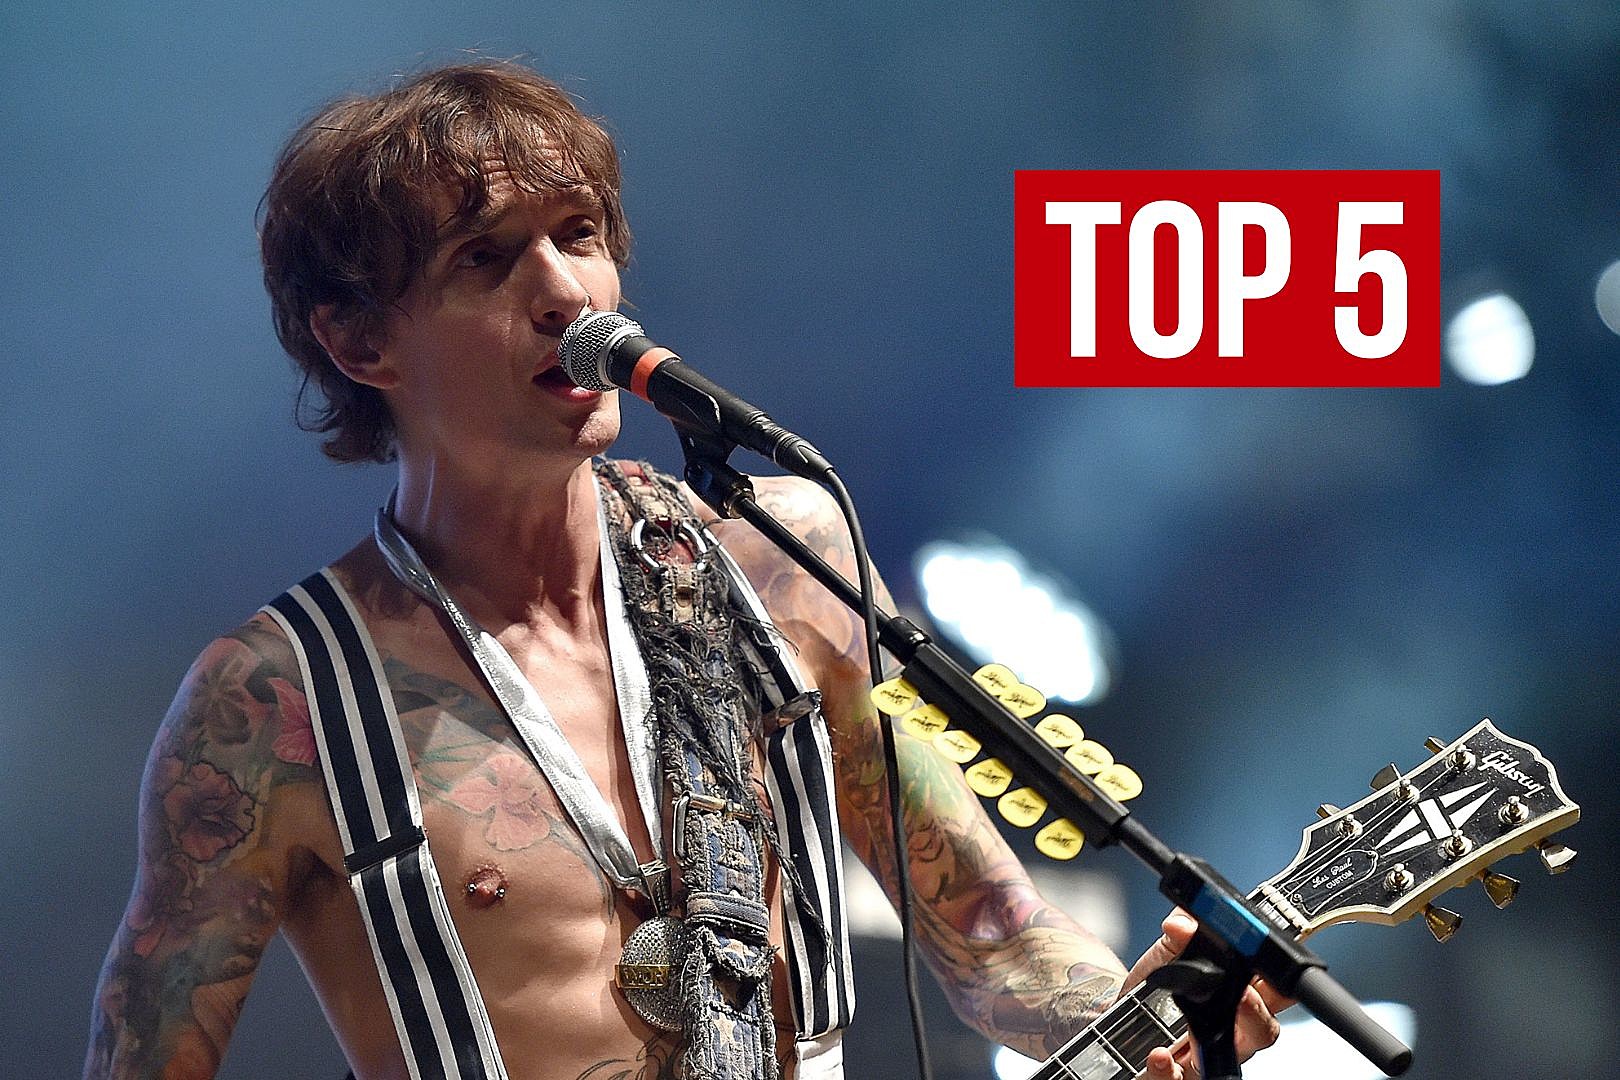 A 2019 Album Is One of Justin Hawkins’ Top Five Albums